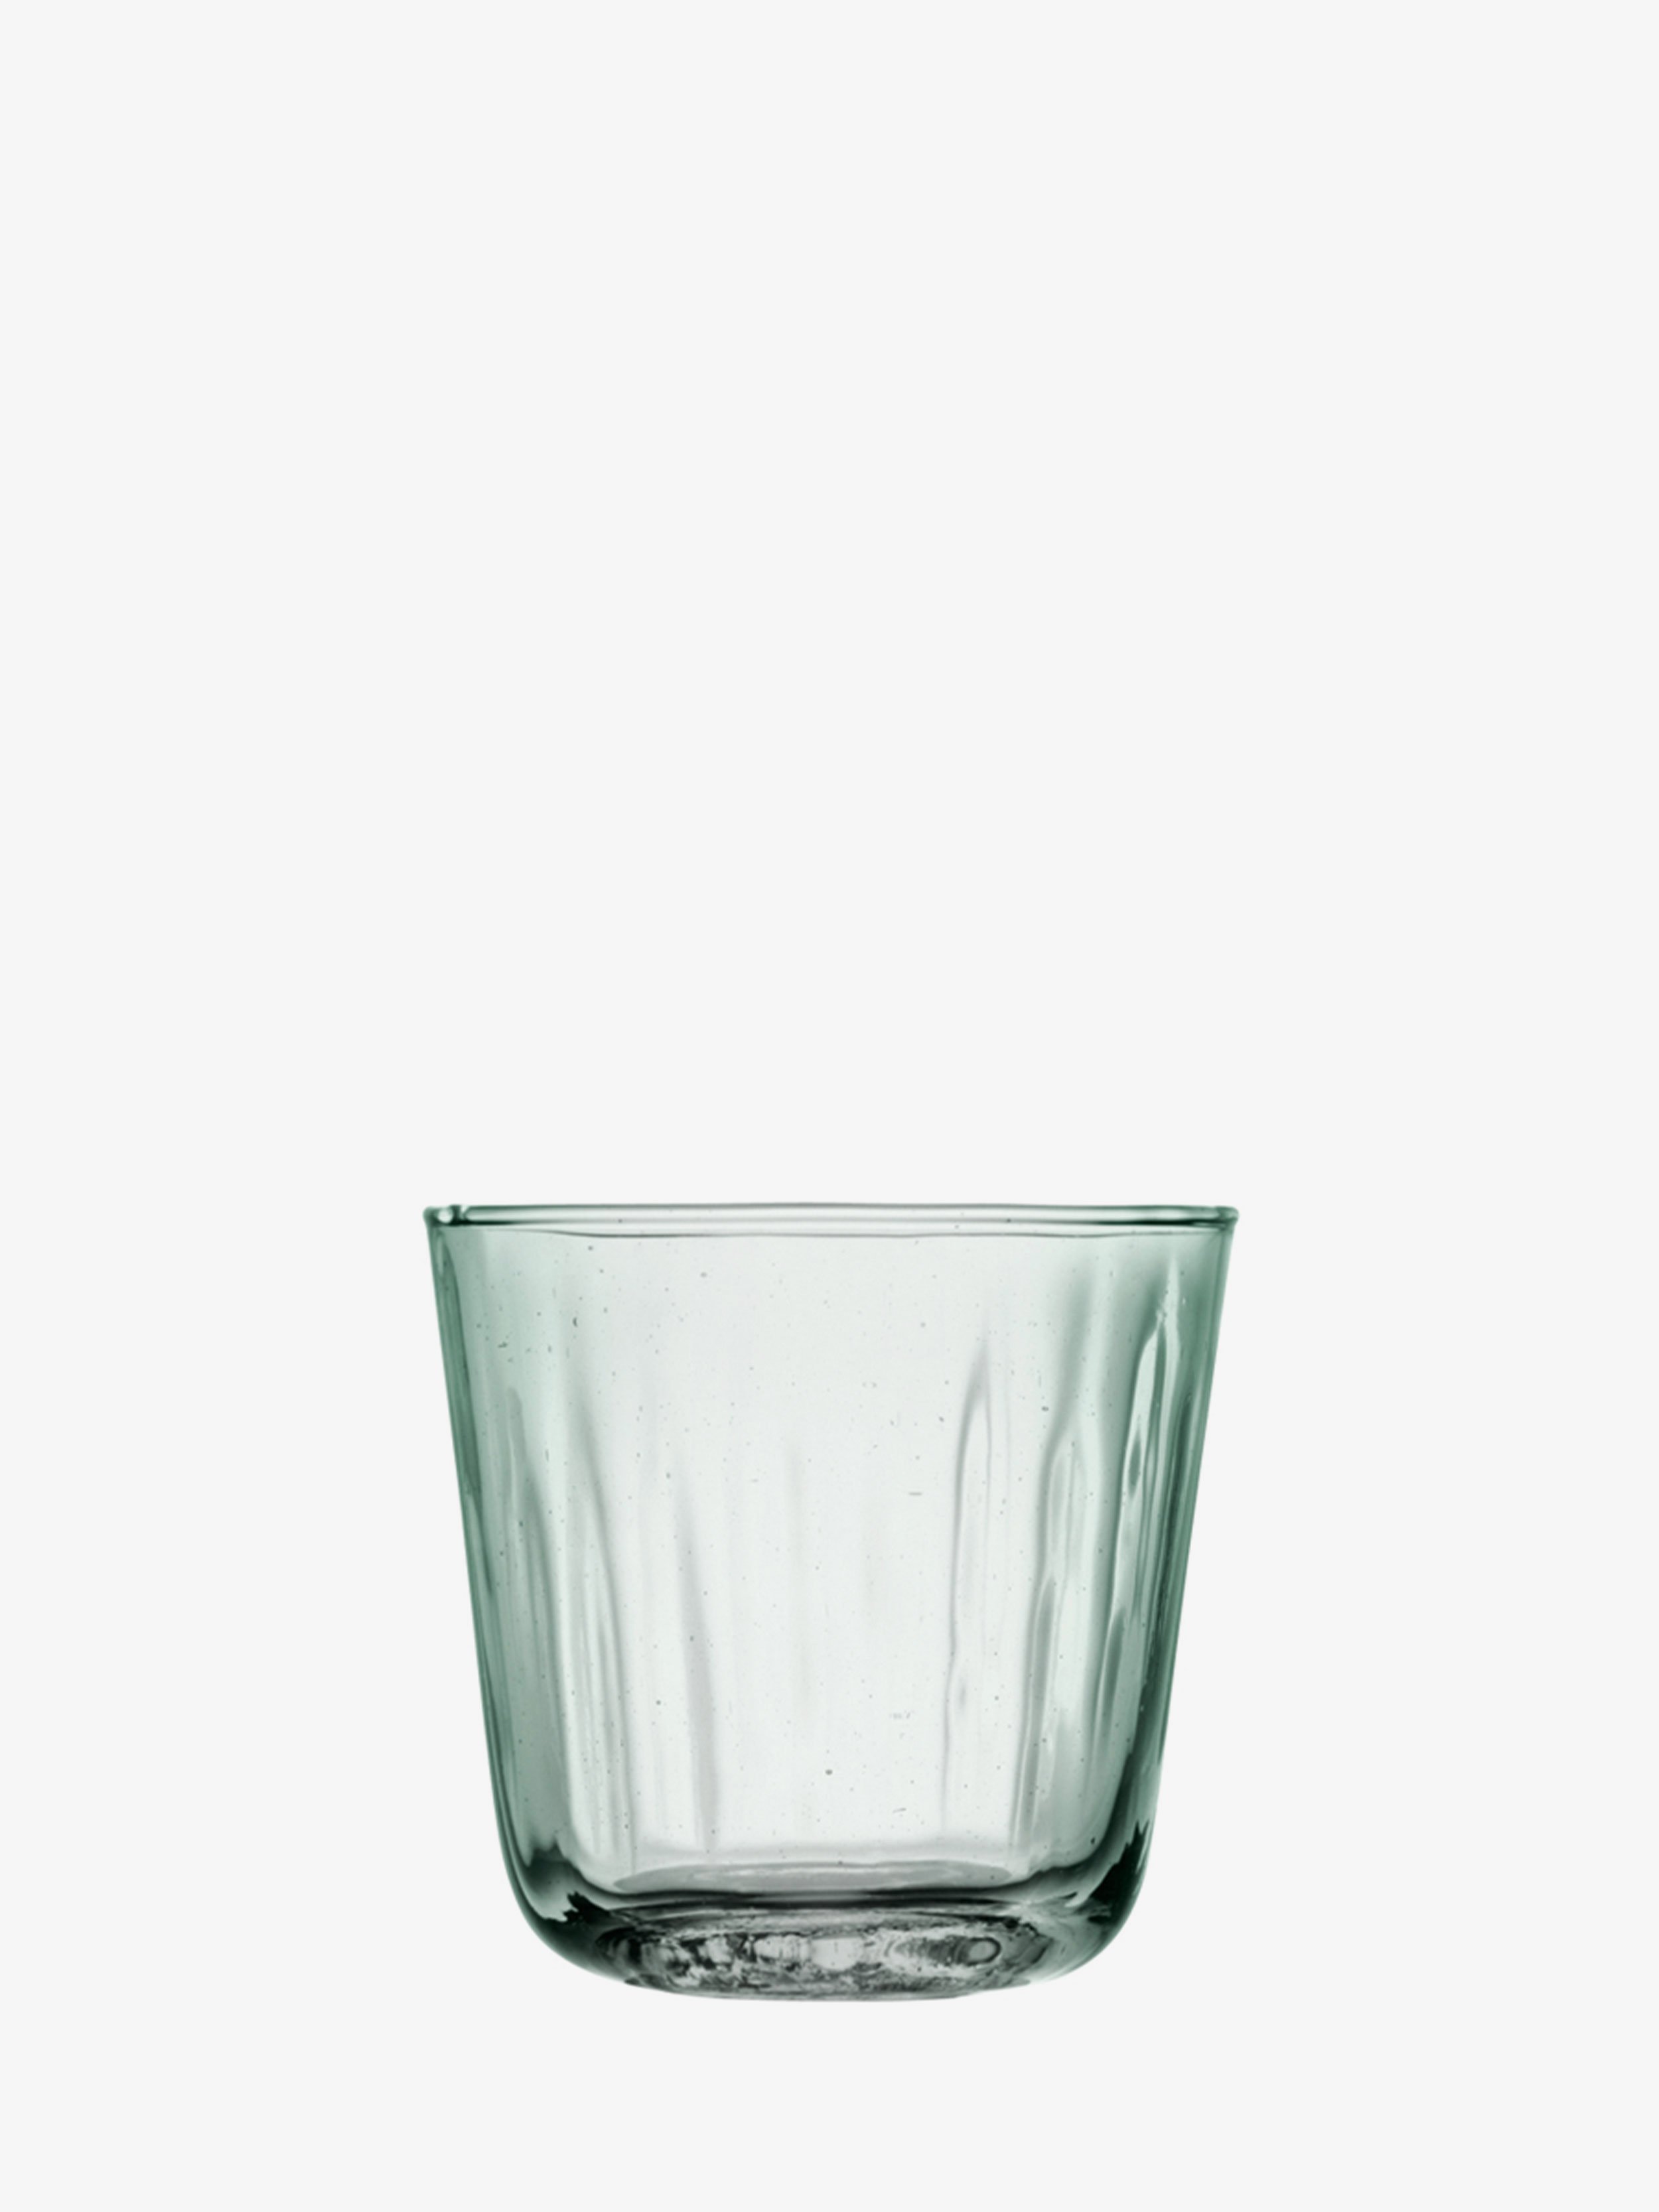 LSA Handblown Recycled Glassware (Set of 4), 4 SIzes on Food52